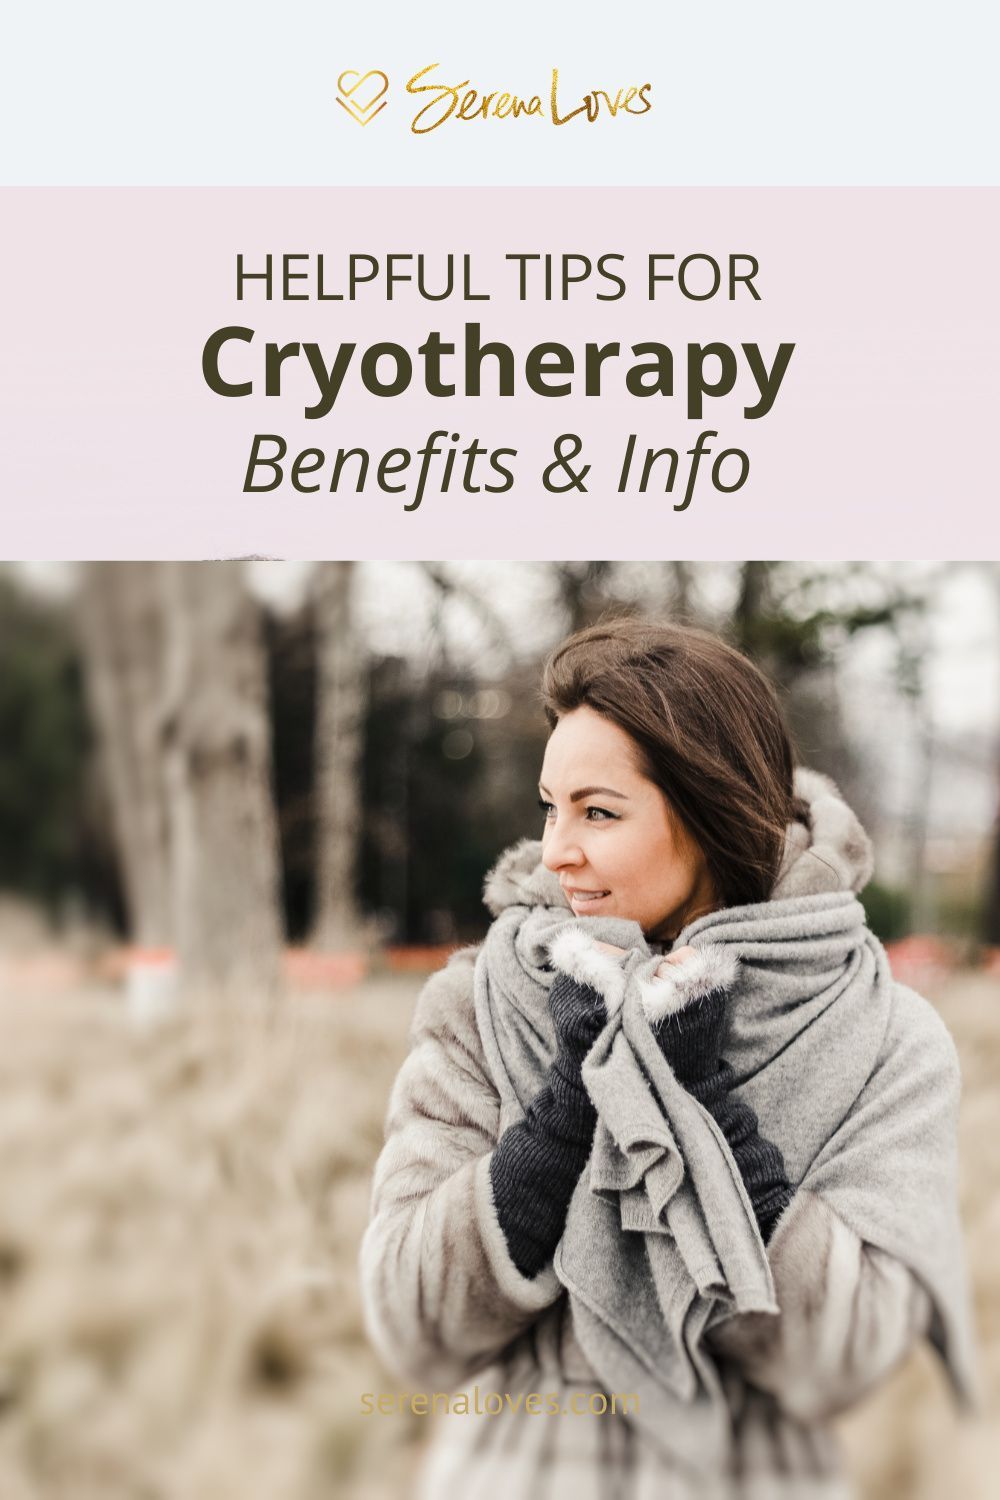 5 Benefits of Cryotherapy for Common People